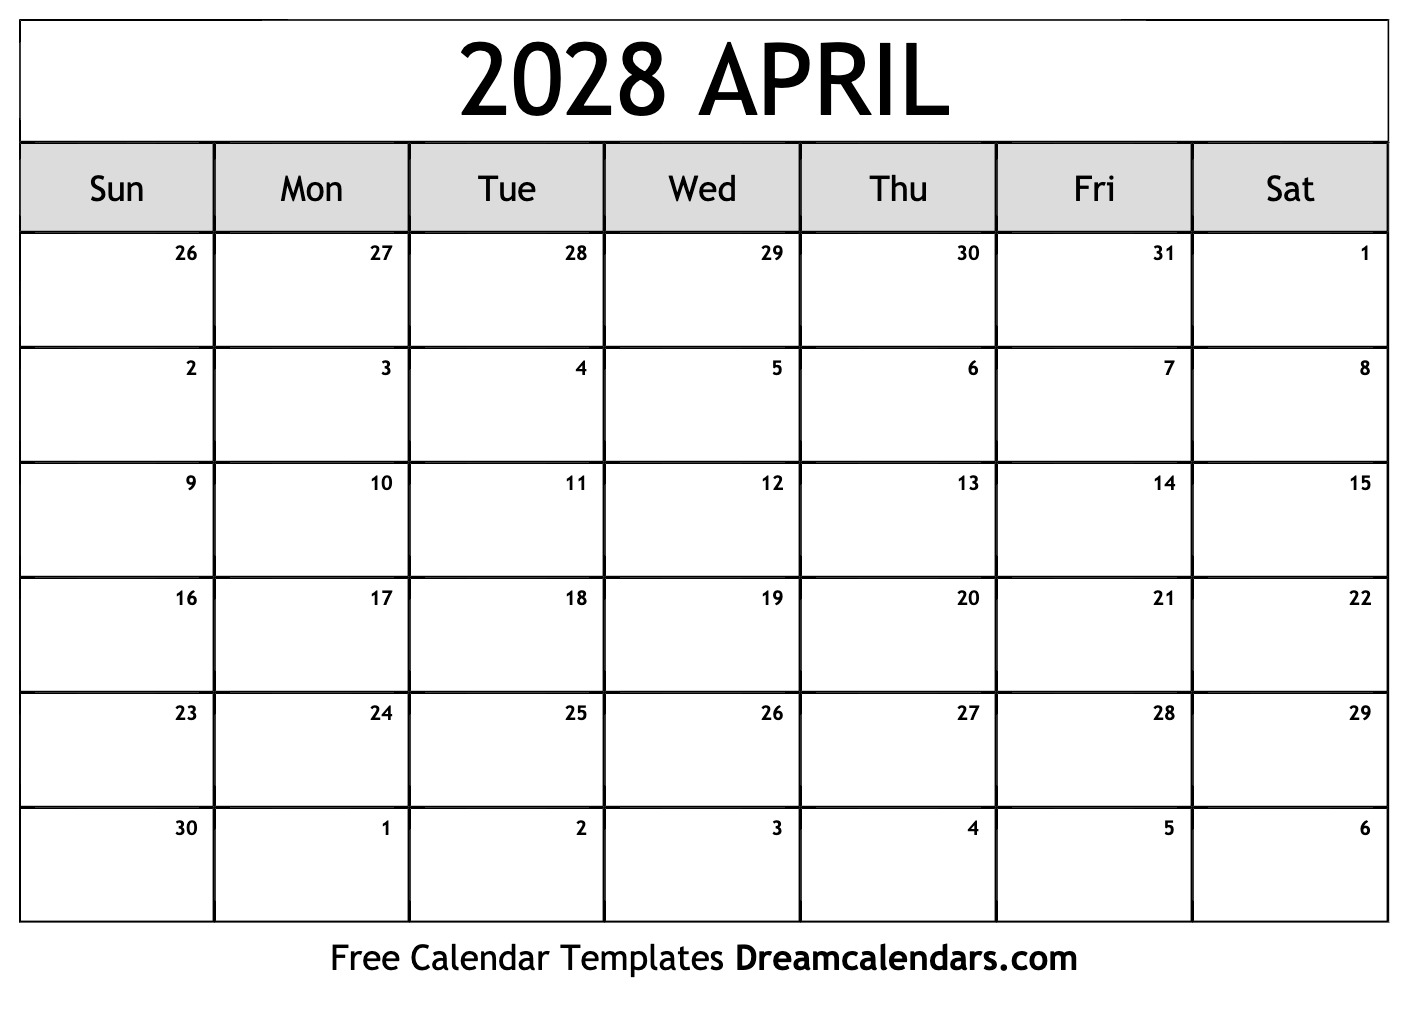 April 2028 Calendar Free Printable With Holidays And Observances